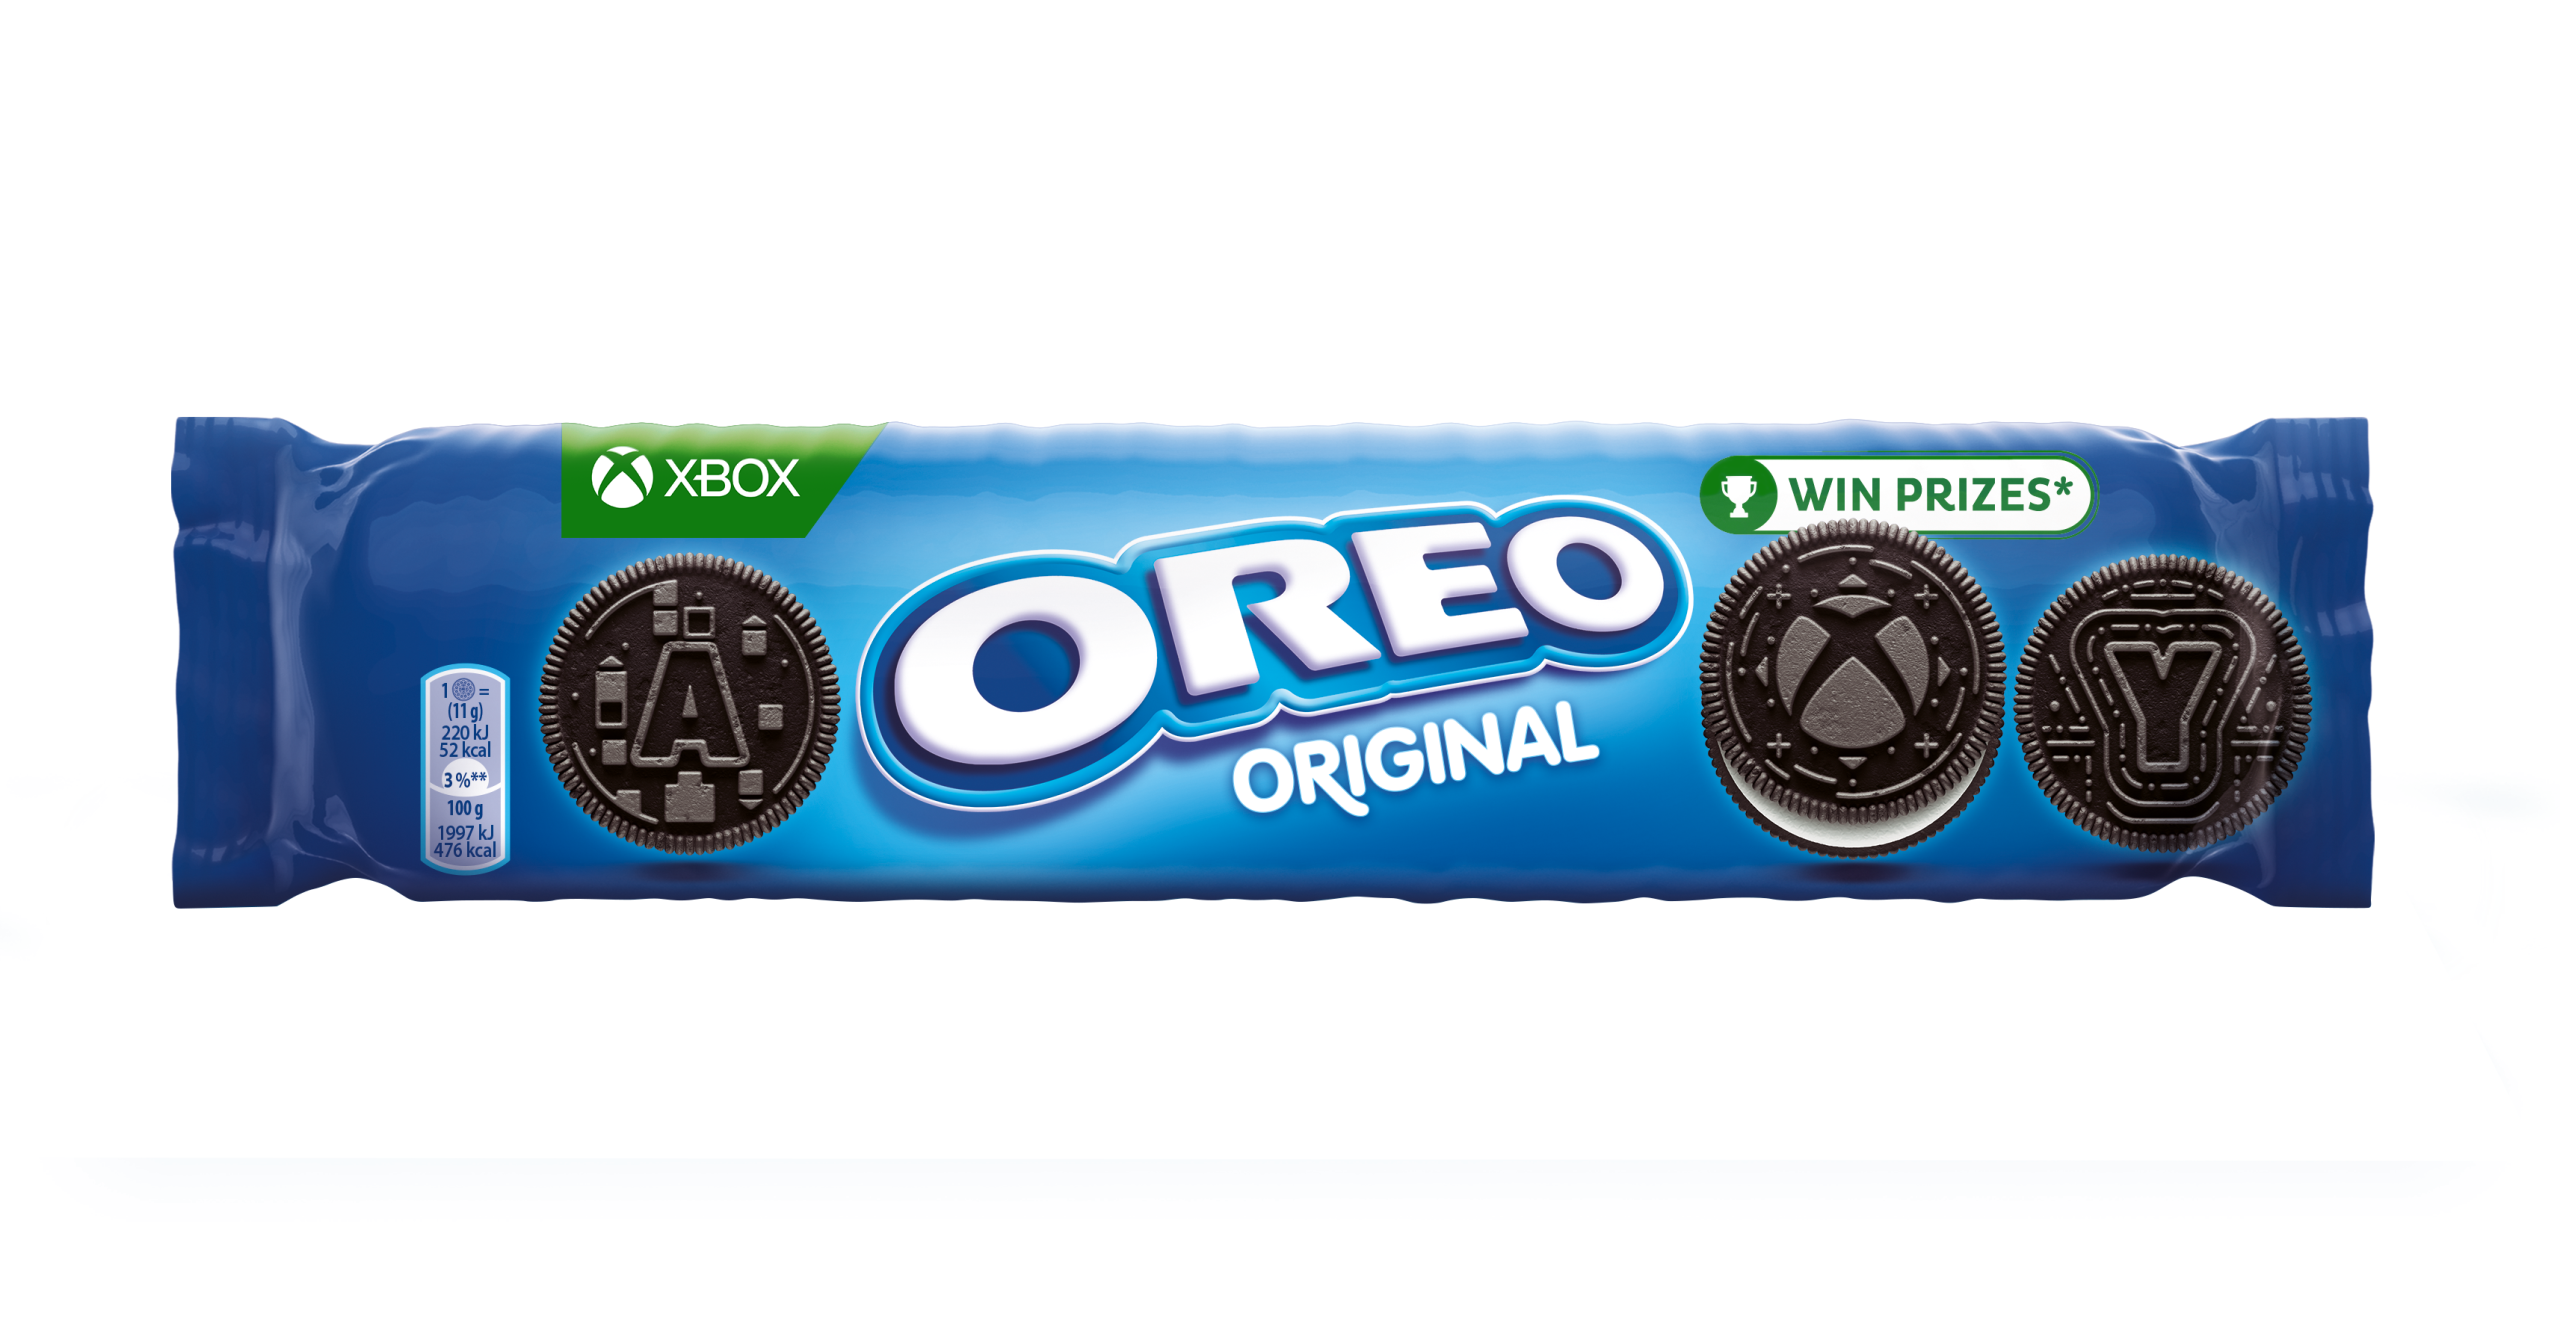 Shoppers can unlock playfulness with OREO and Xbox on-pack promotion